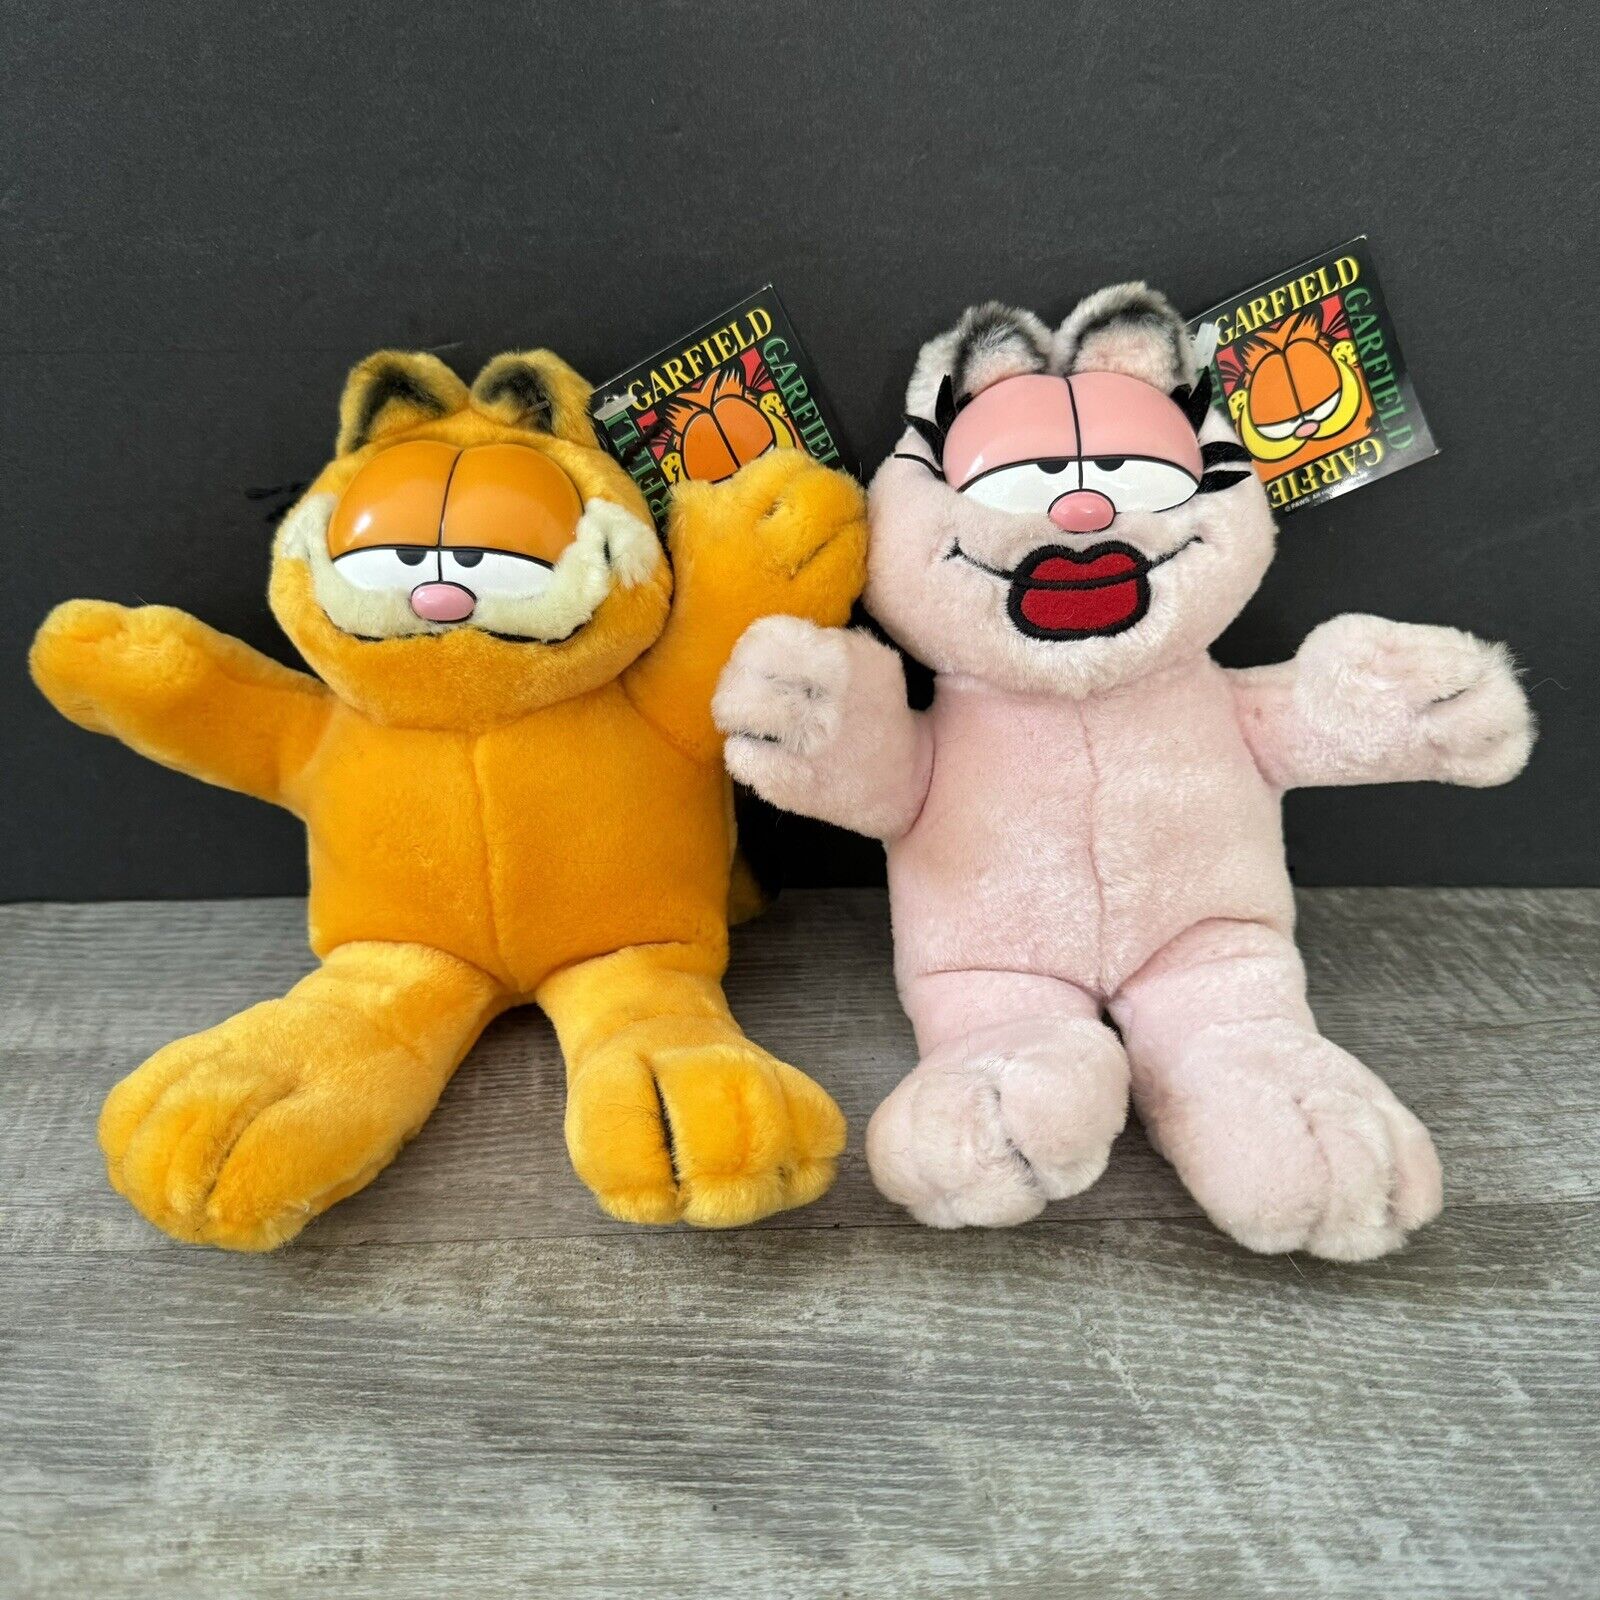 GARFIELD & ARLENE Bean Bag Plush 6” by Fine Toy Co. Paws 1978 with Tags